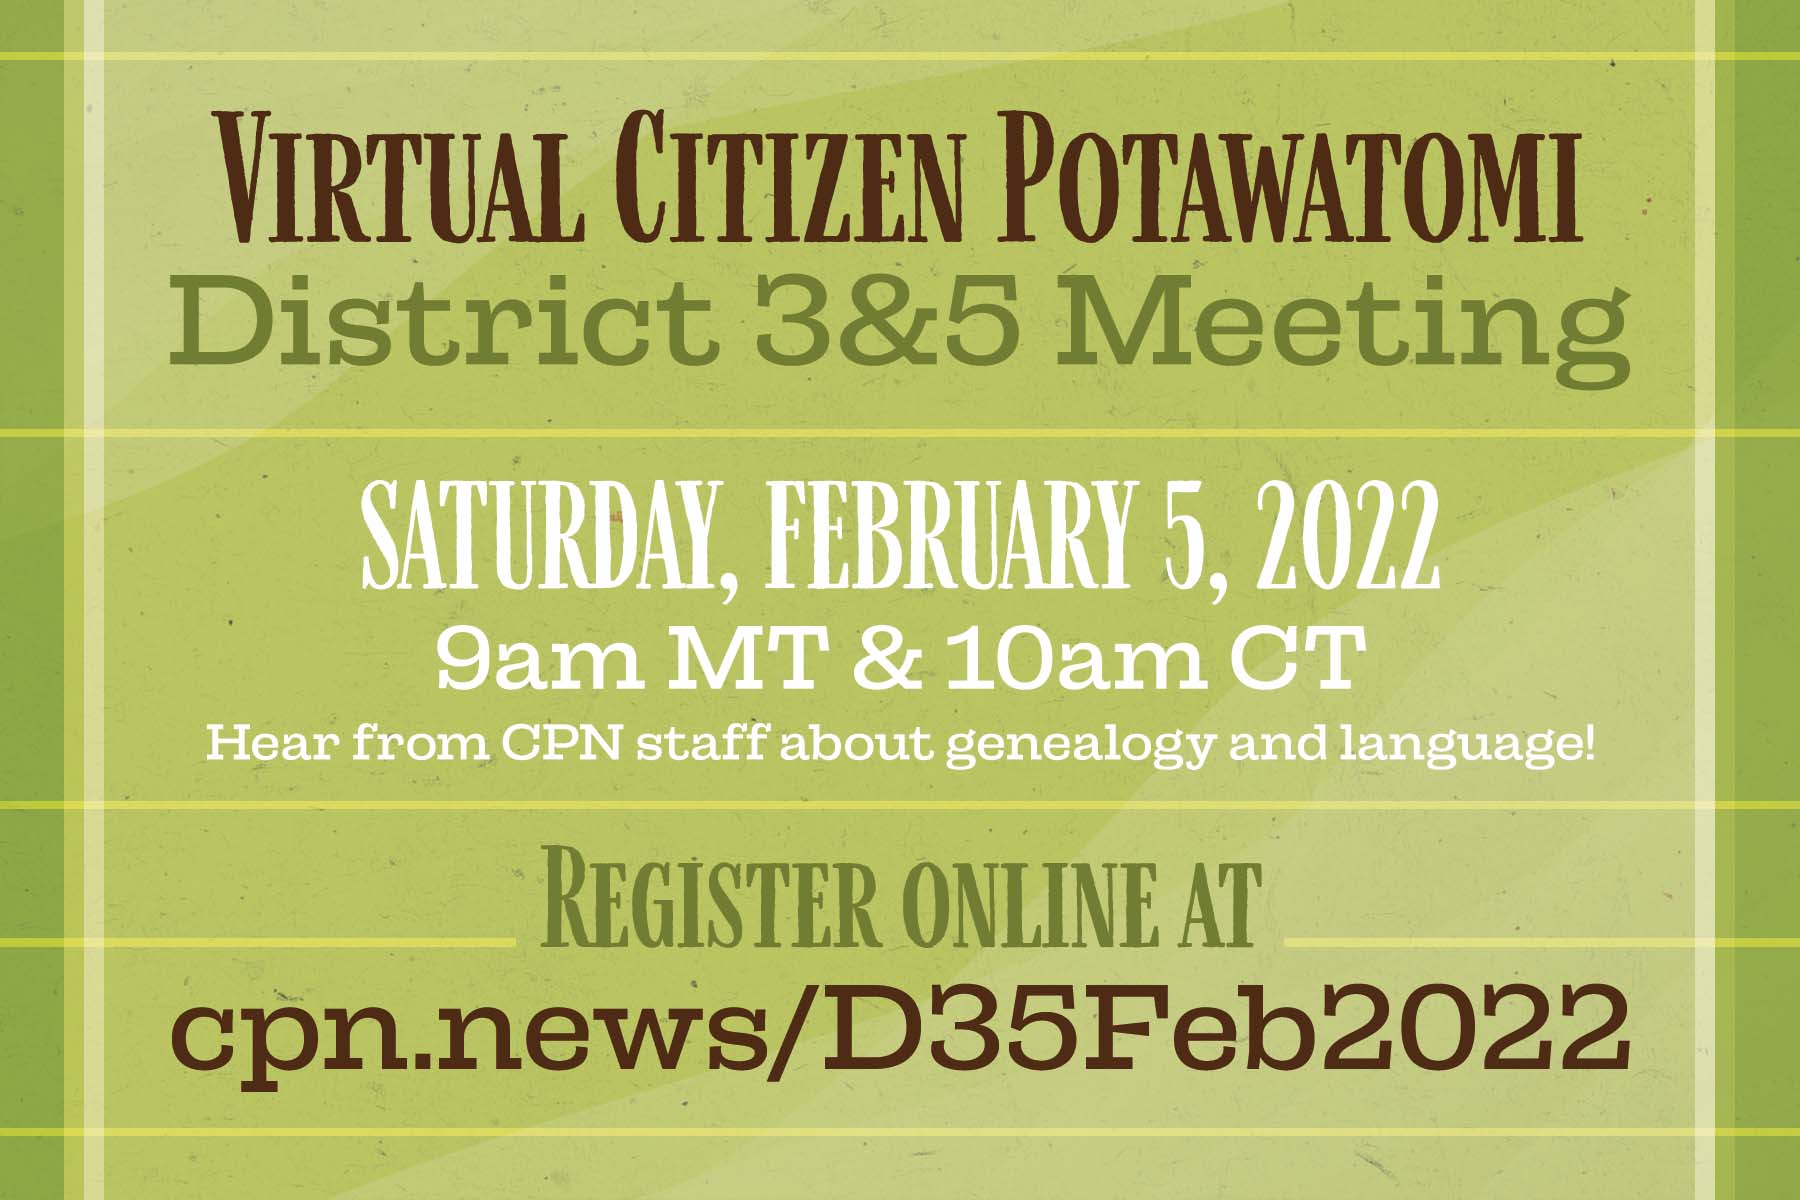 A light green graphic with yellow, white, and dark green plaid stripes advertising Virtual Citizen Potawatomi District 3 & 5 Meeting, Saturday, February 5, 2022, 9am MT & 10am CT. Hear from CPN staff about genealogy and language! Register online at cpn.news/d35feb2022